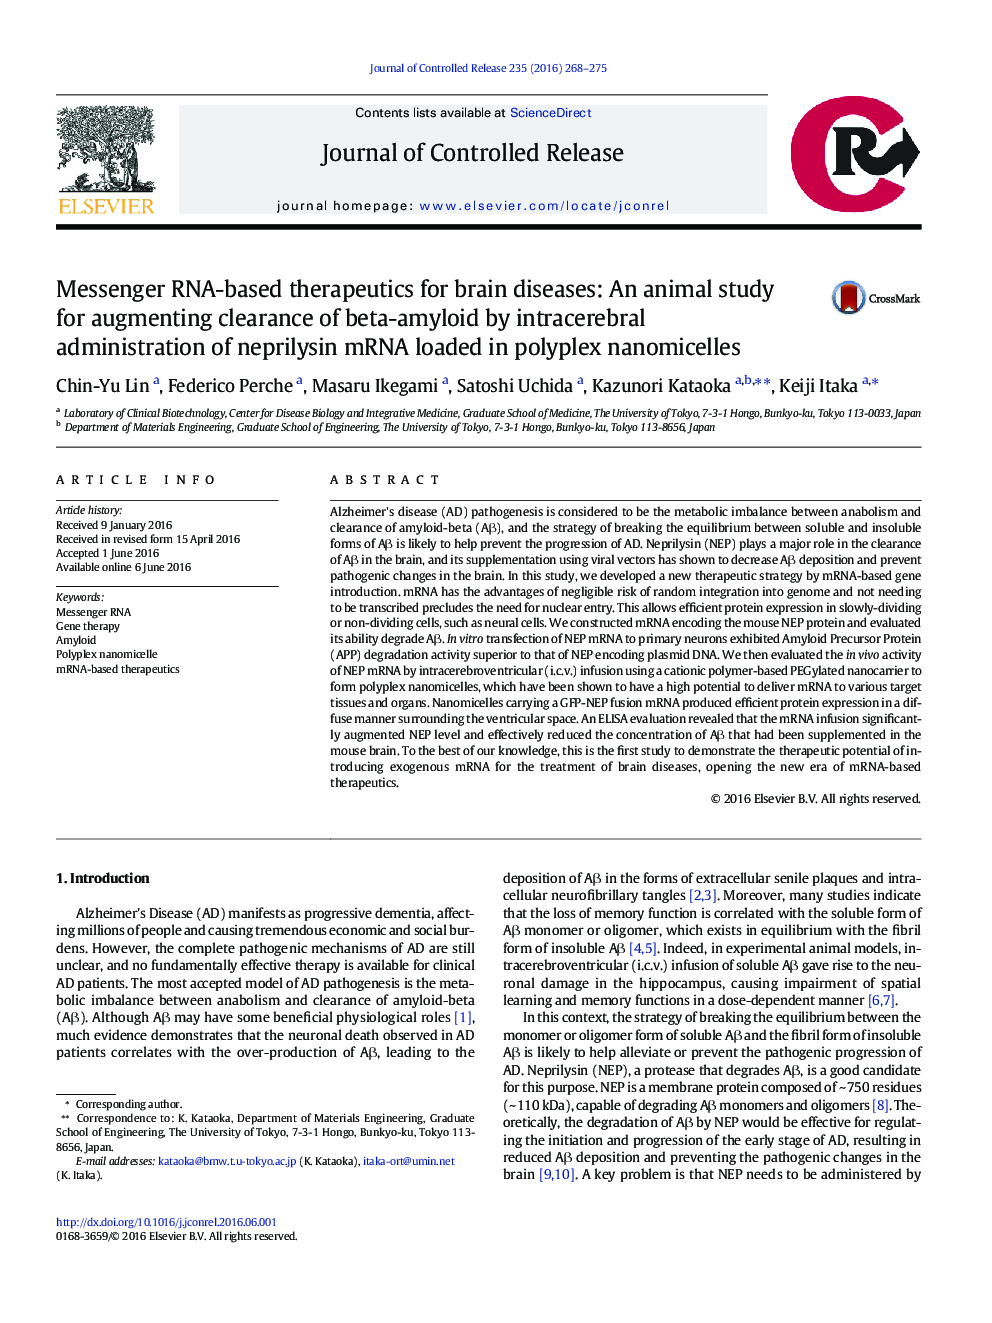 Messenger RNA-based therapeutics for brain diseases: An animal study for augmenting clearance of beta-amyloid by intracerebral administration of neprilysin mRNA loaded in polyplex nanomicelles